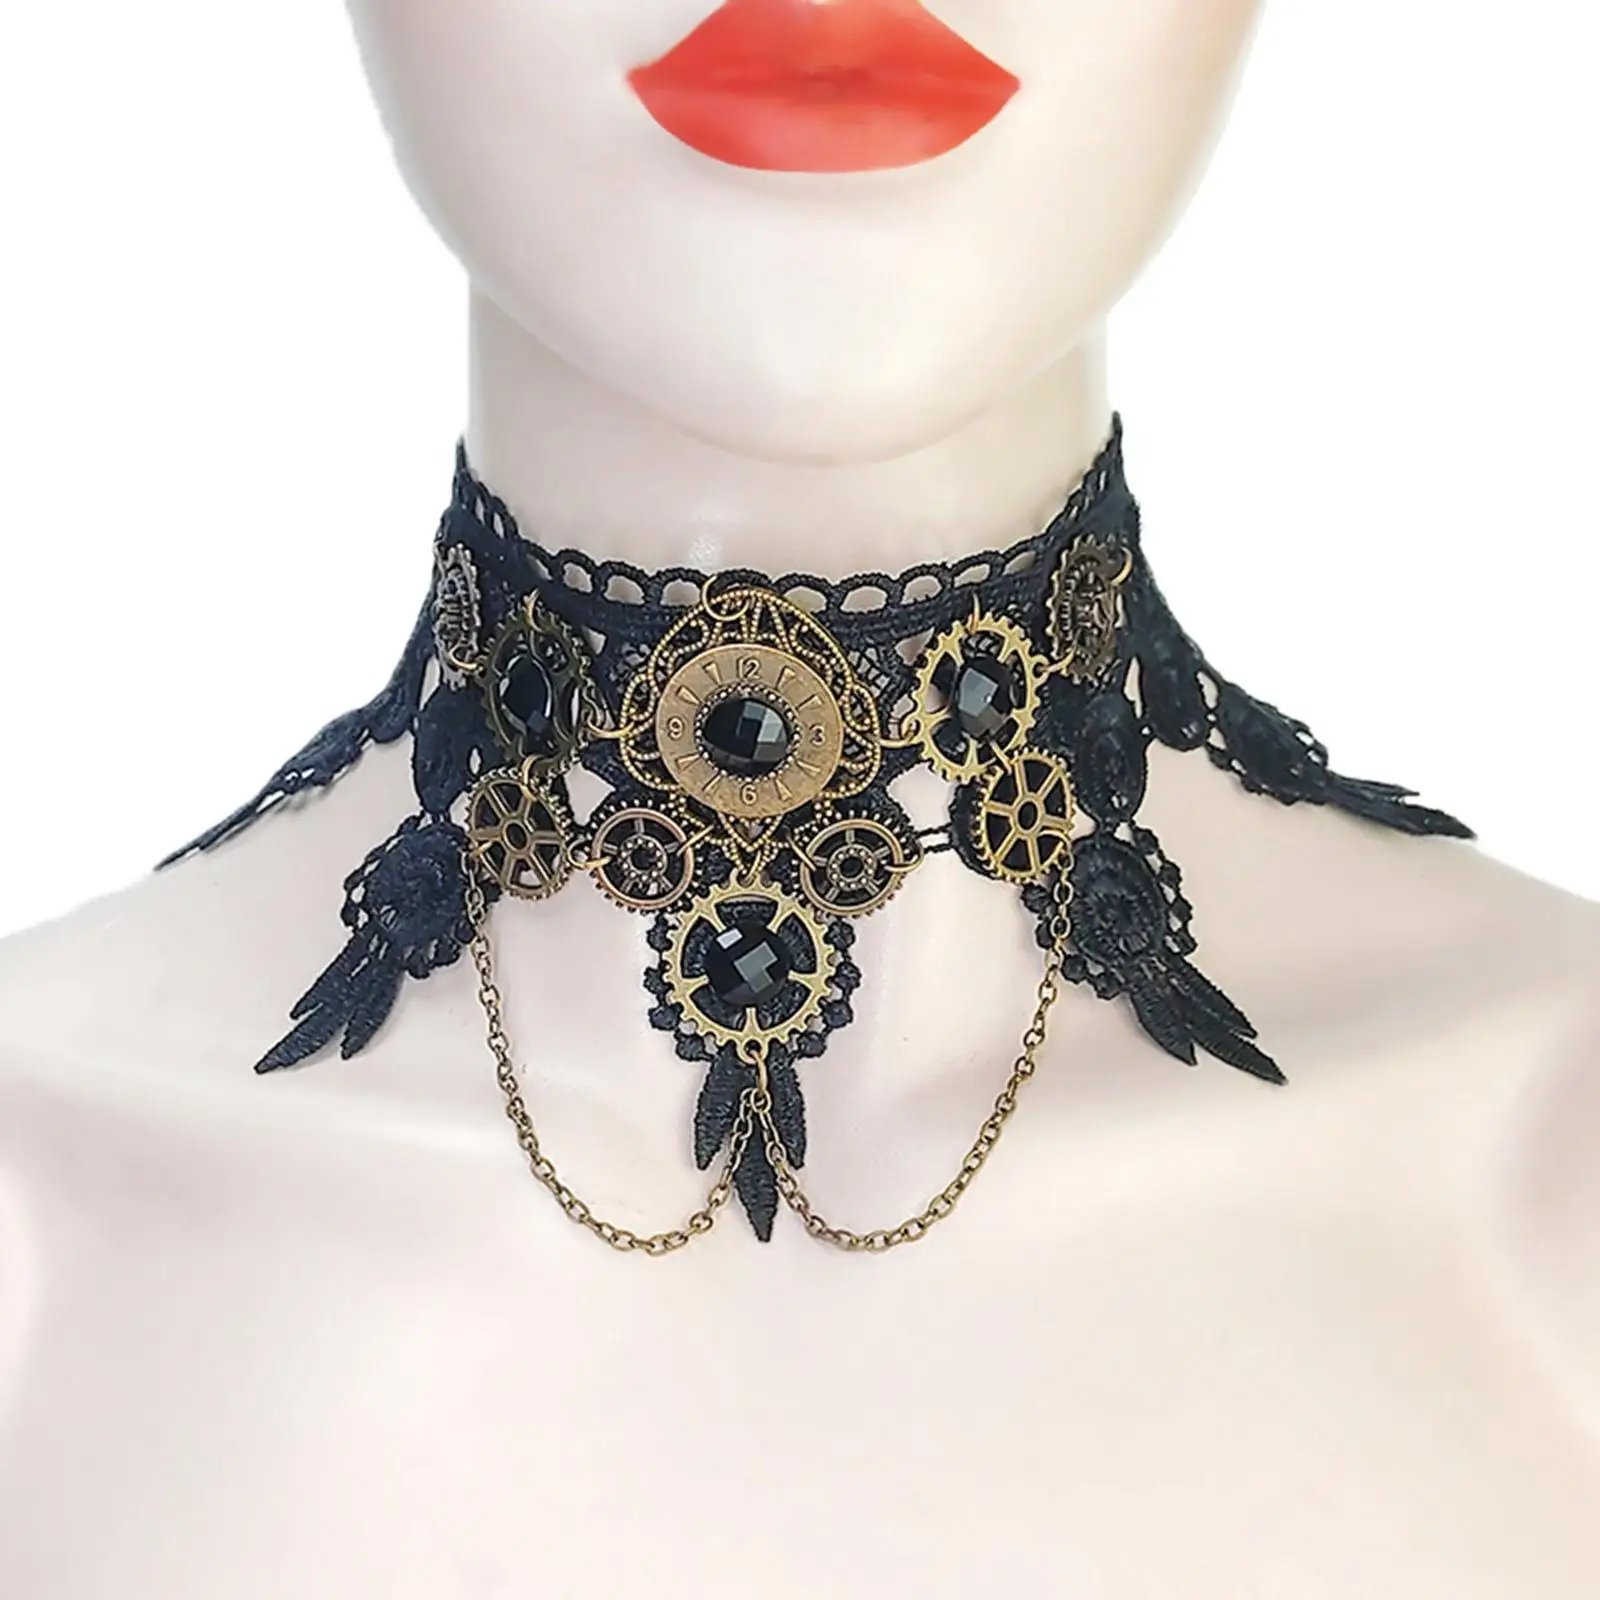 Black Lace Gothic Choker Necklace, Punk  Elegant Gear Pendant, for Wedding Party Halloween Costume Cosplay Women Girls.